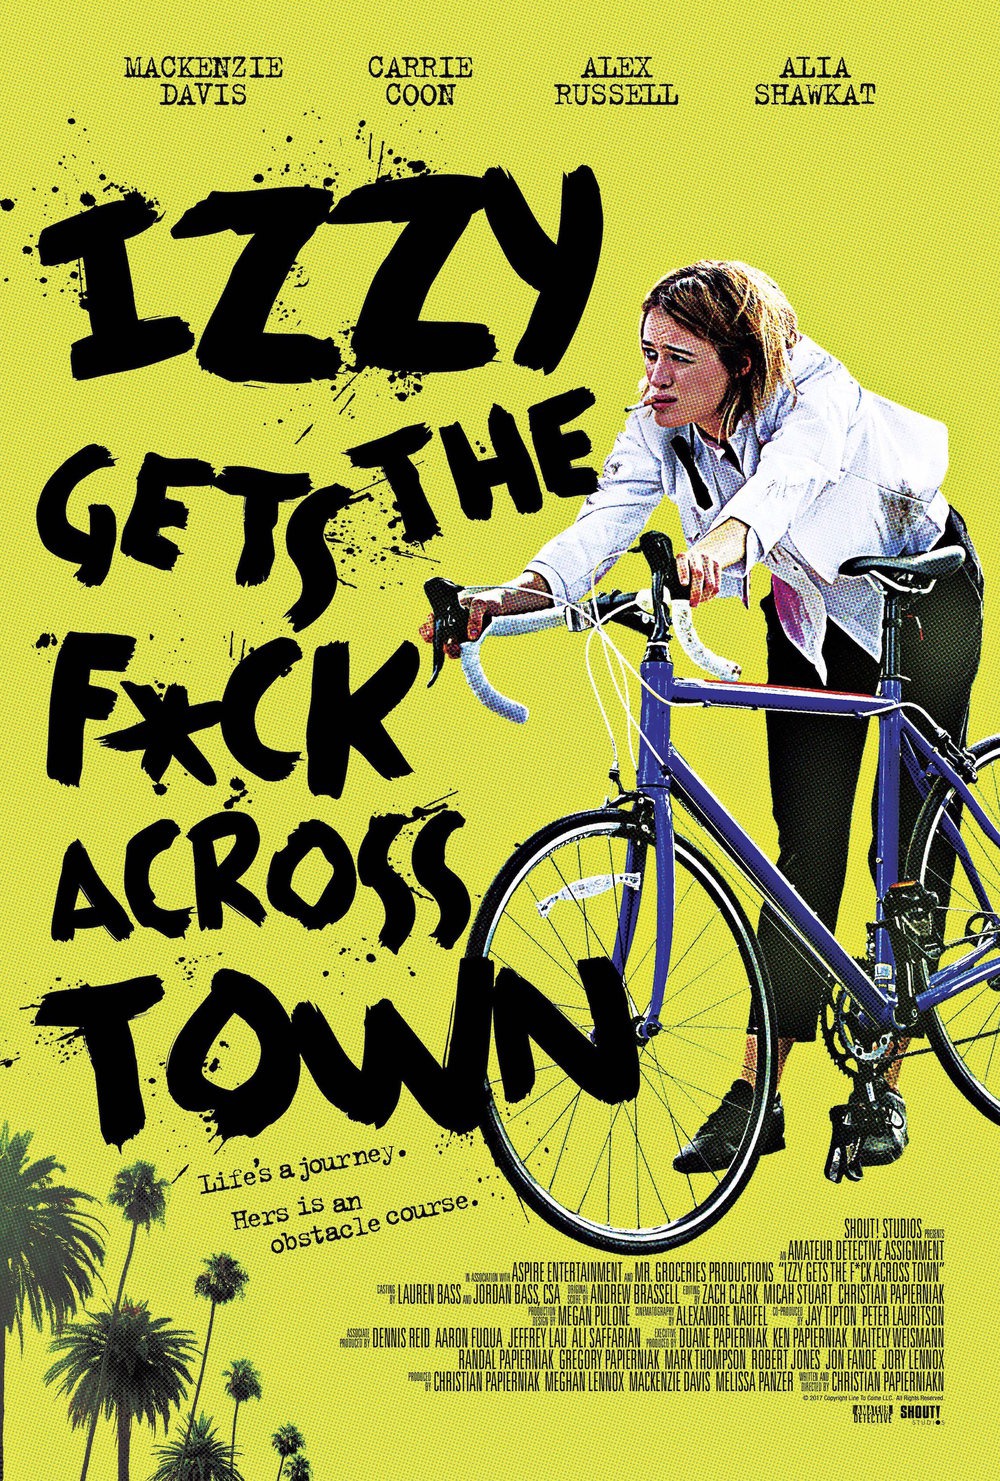 Izzy Gets the F**k Across Town